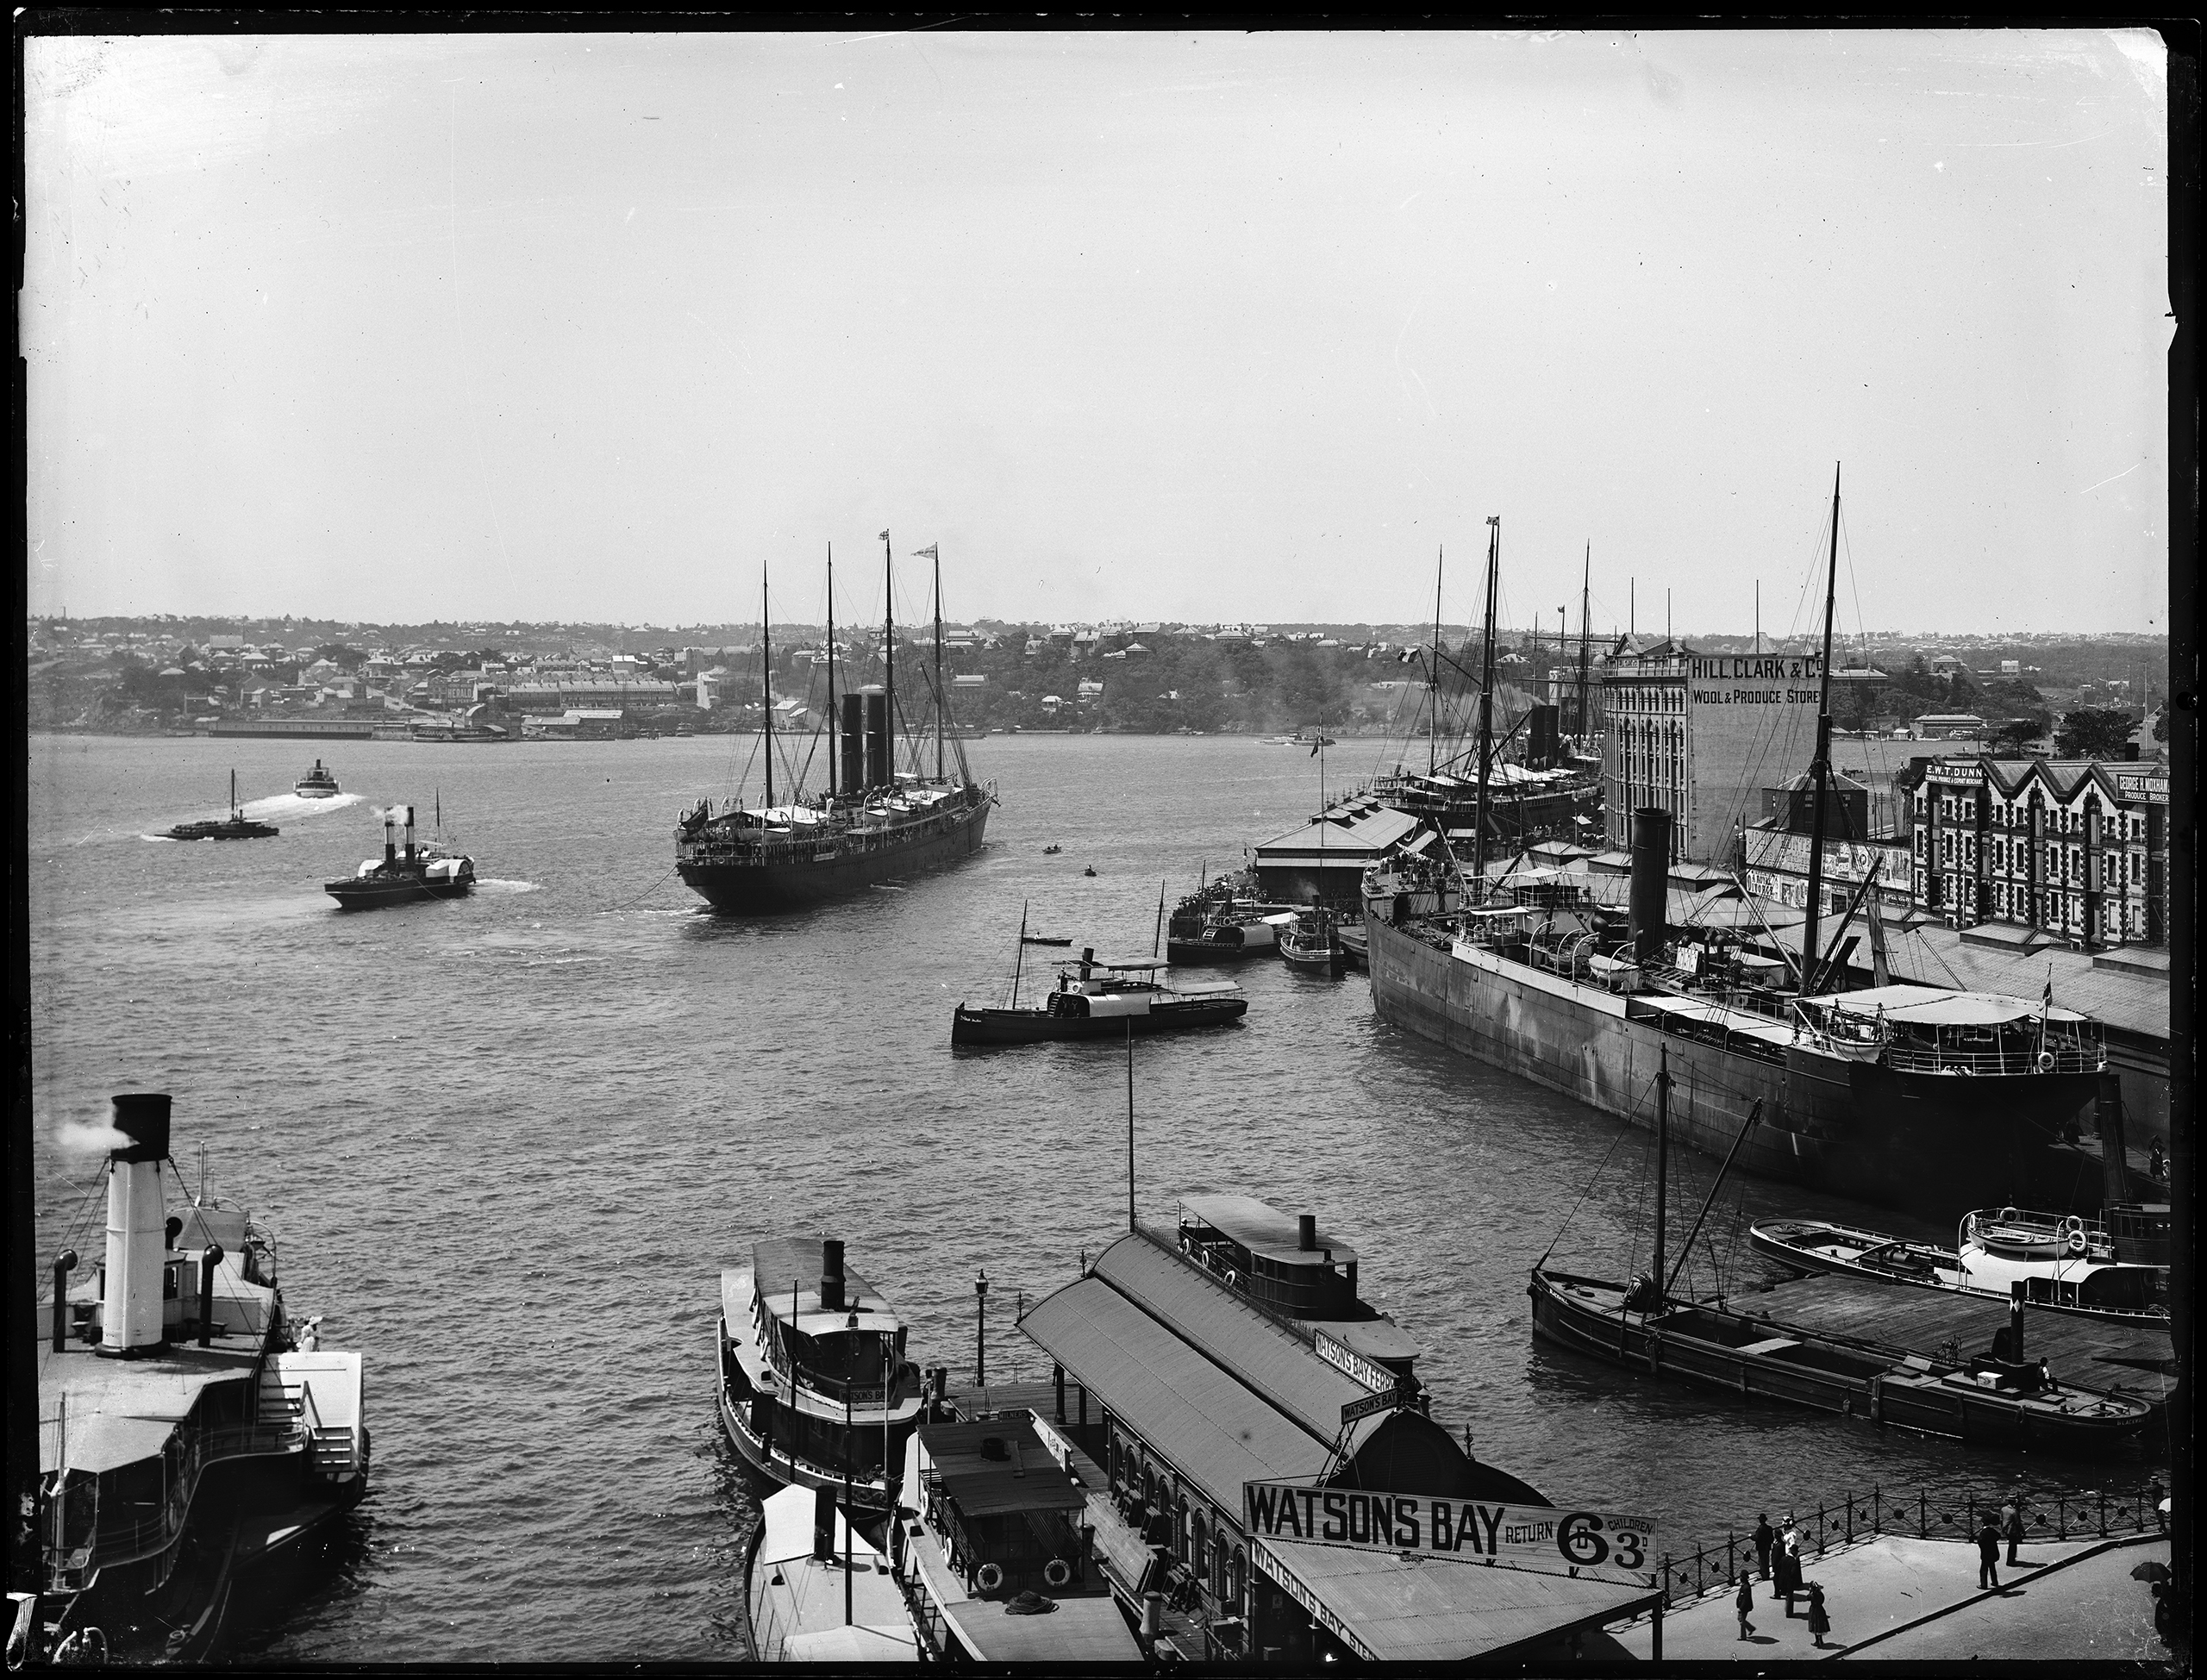 Glass plate negative of Orient liner 'Austral', paddle tug 'Commodore' and various ships, tugs and ferries in Sydney Cove, 1884-1908